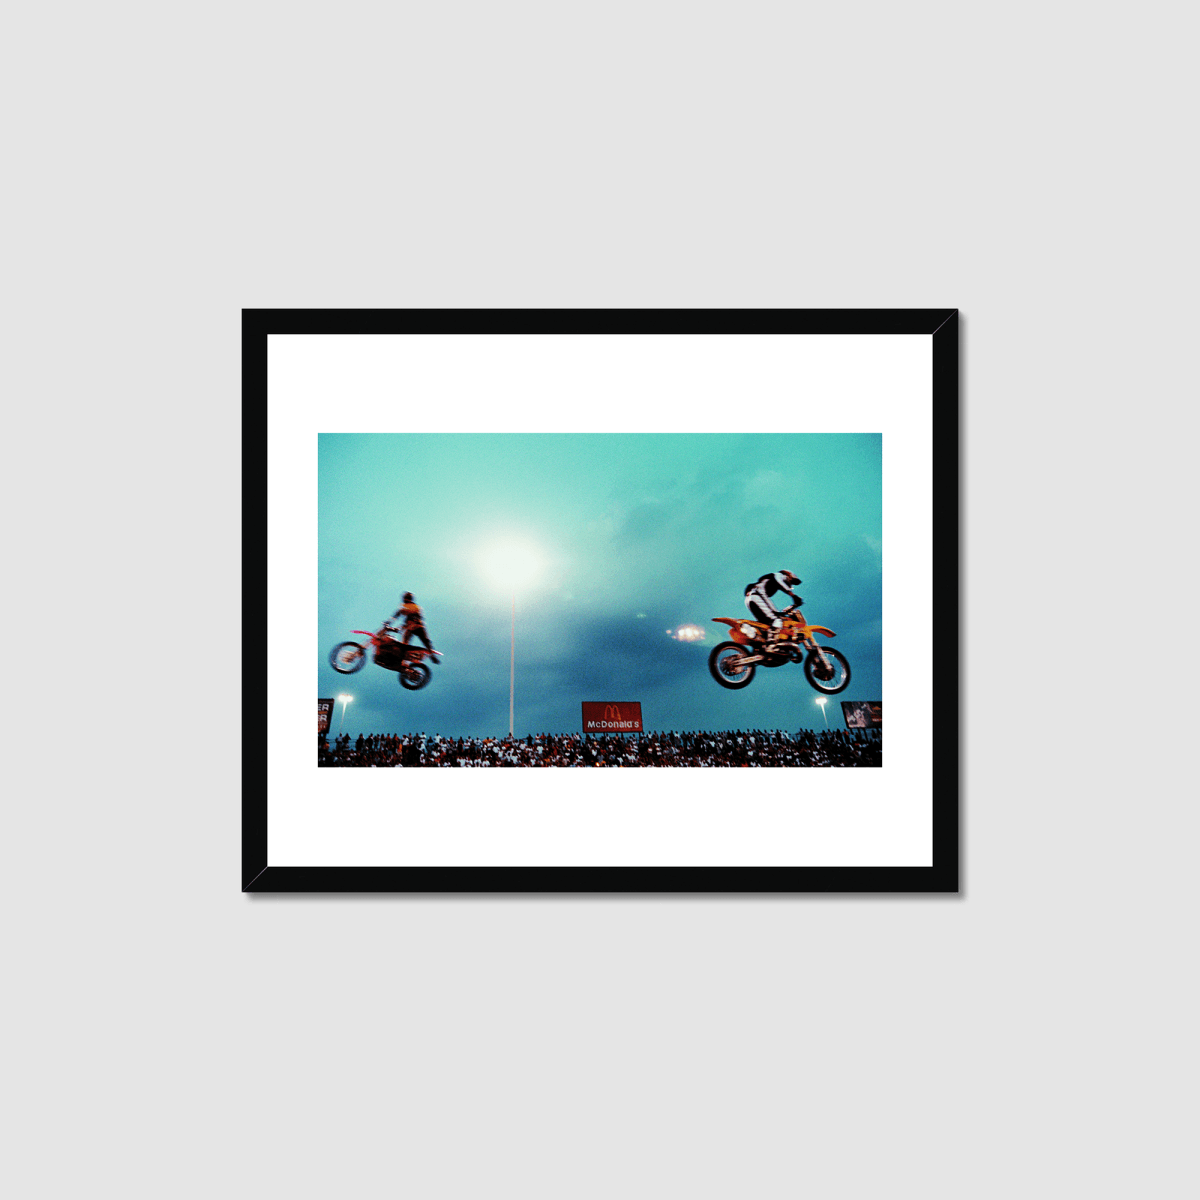 Big Air Competition, Three Minute Grand Prize Jump-off Framed Print